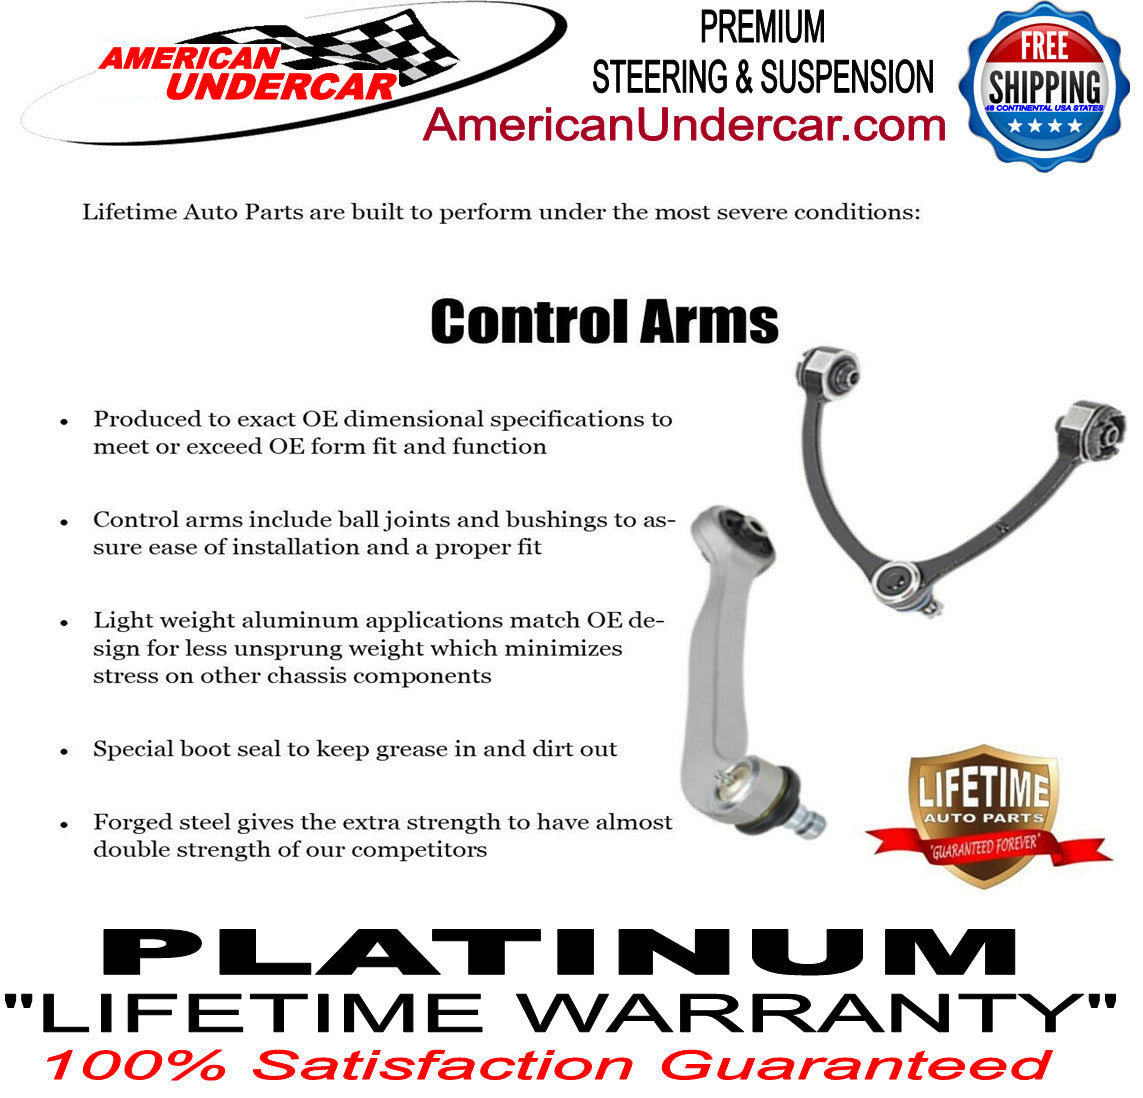 Lifetime Tie Rod Drag Link Sleeves Steering Kit for 2011-2016 Ford F250, F350 Super Duty 4x4 SRW